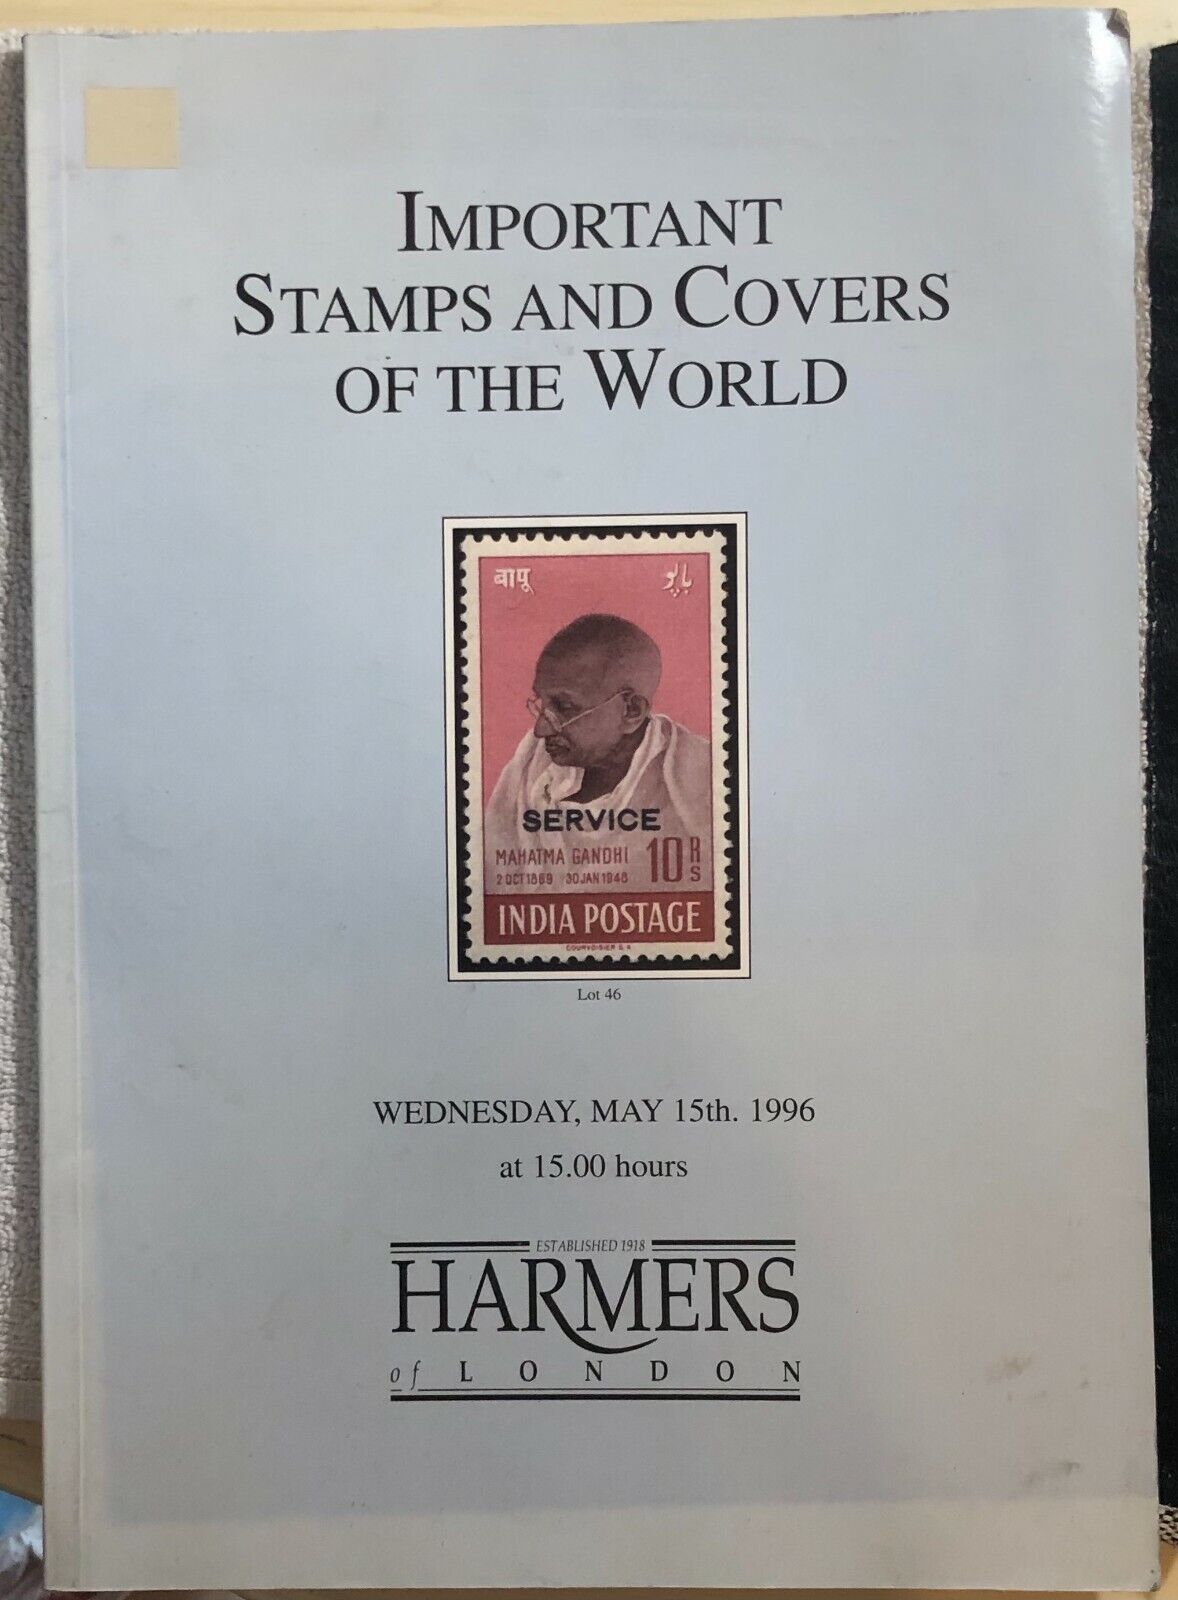 Important stamps and covers of the world di Aa.vv.,  1996,  Harmers Of London